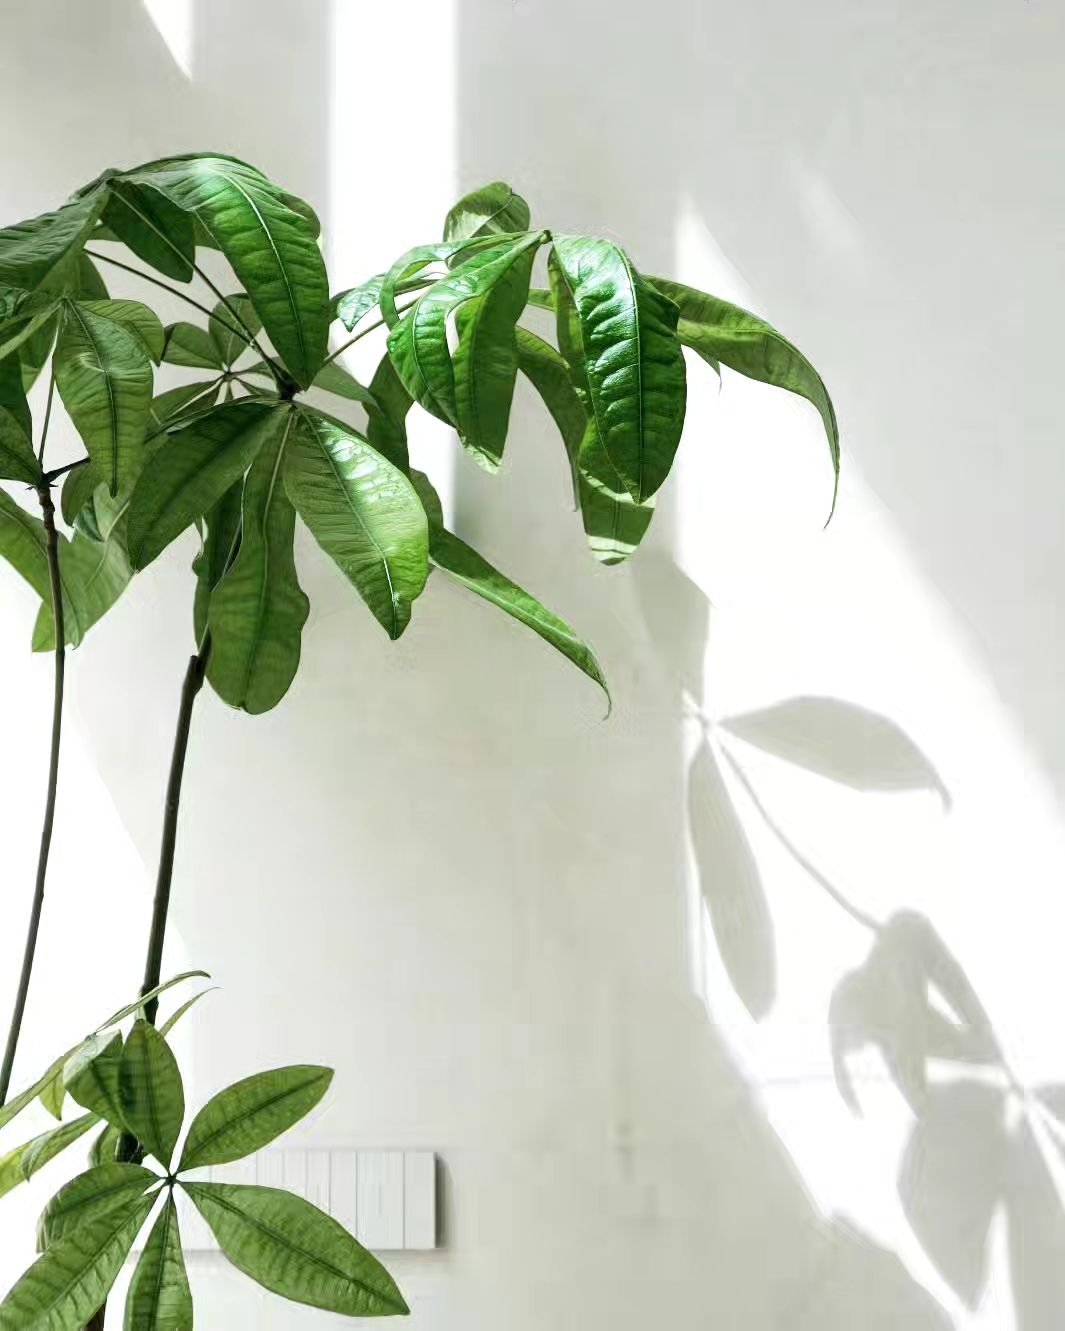 🌿 
-
#baobabarquitectura #arquitectura #archidaily #home #green #plants #homedecor